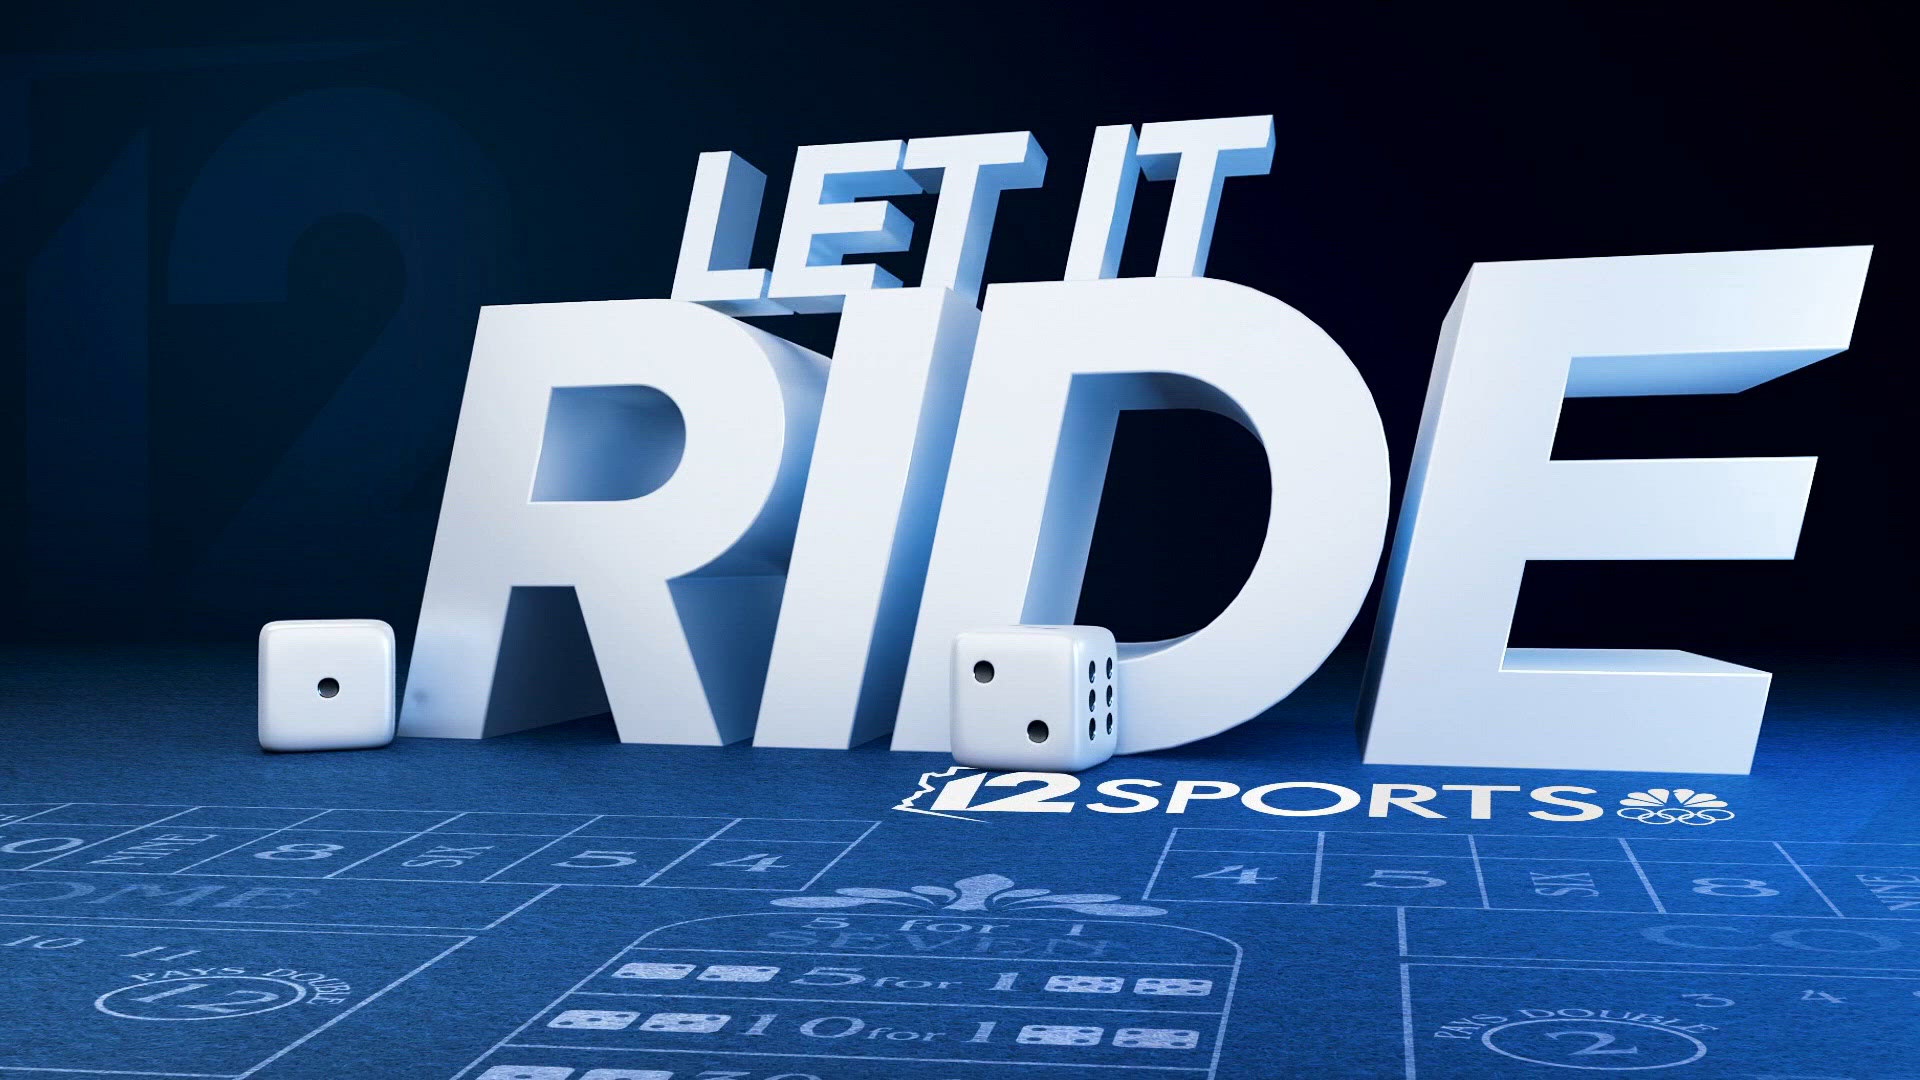 12News' Luke Lyddon is joined once again by betting analyst Andrew McInnis to take a look at the best bets in the NBA, NHL, WNBA and more. Click here to watch!